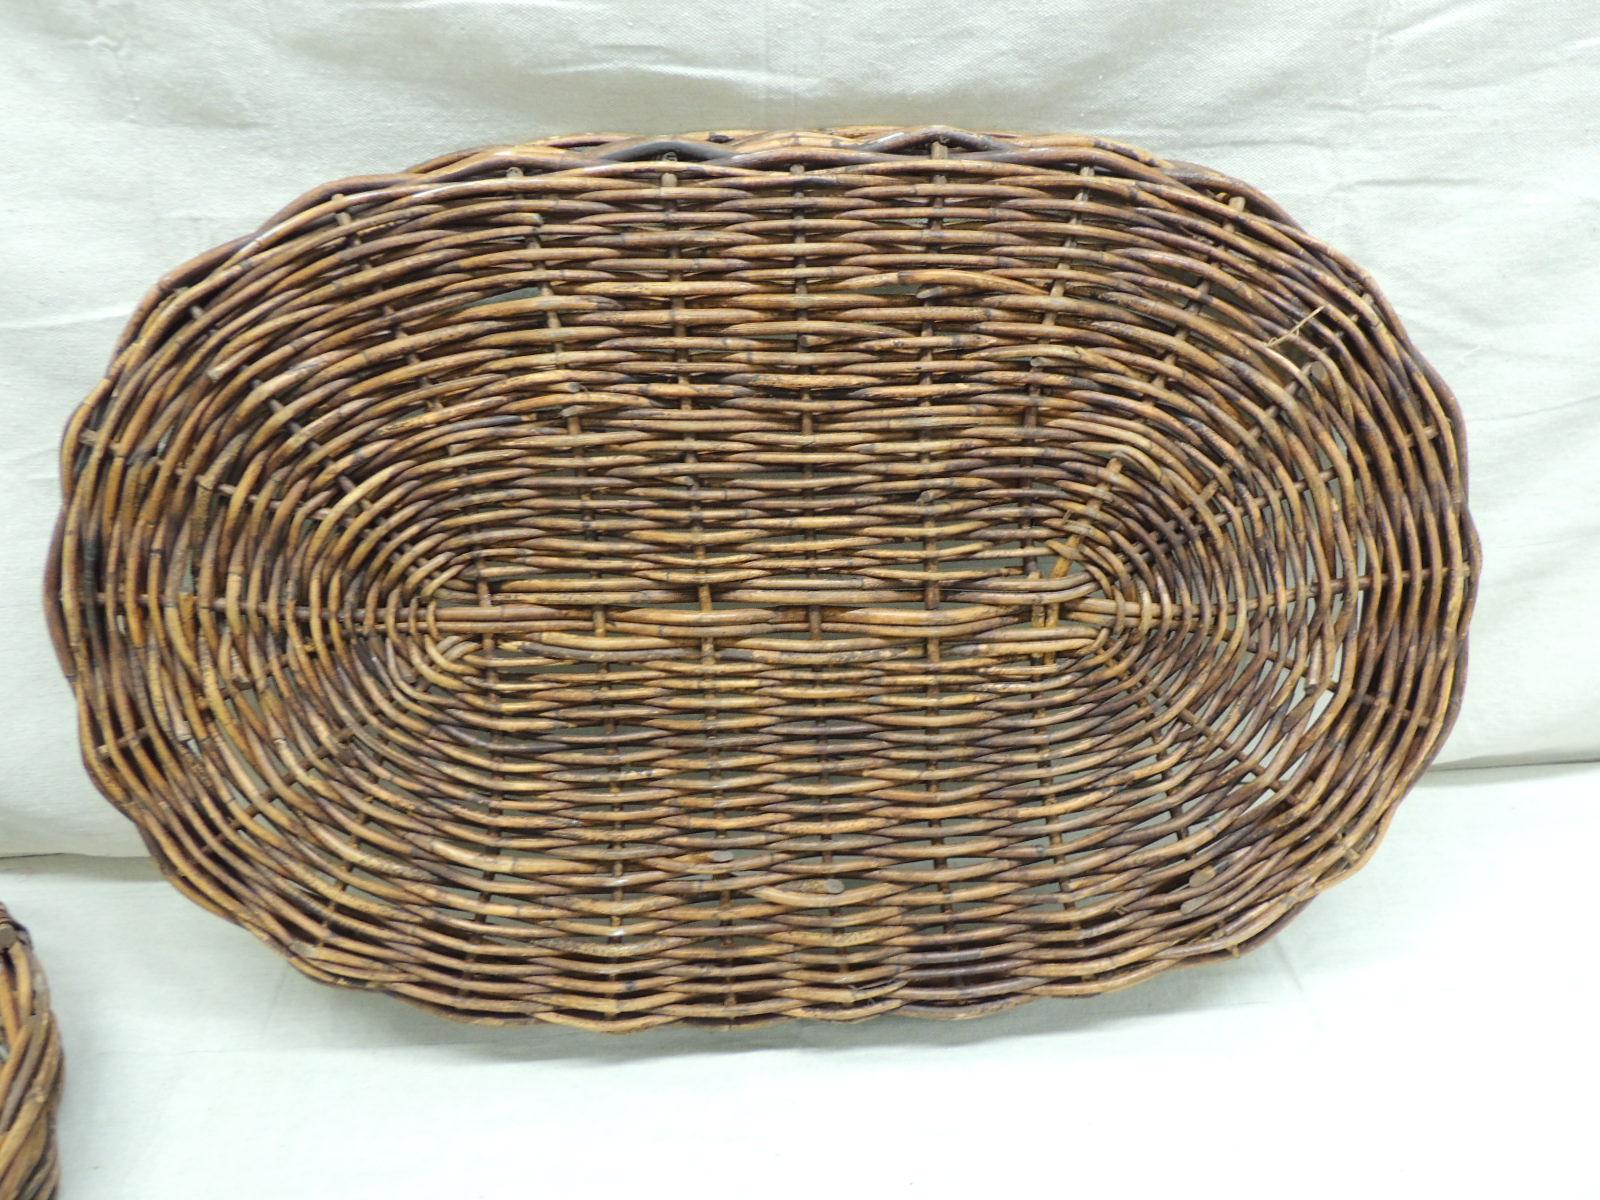 Indonesian Set of '2' Rattan Oval Large Woven Nesting Serving Trays with Handles